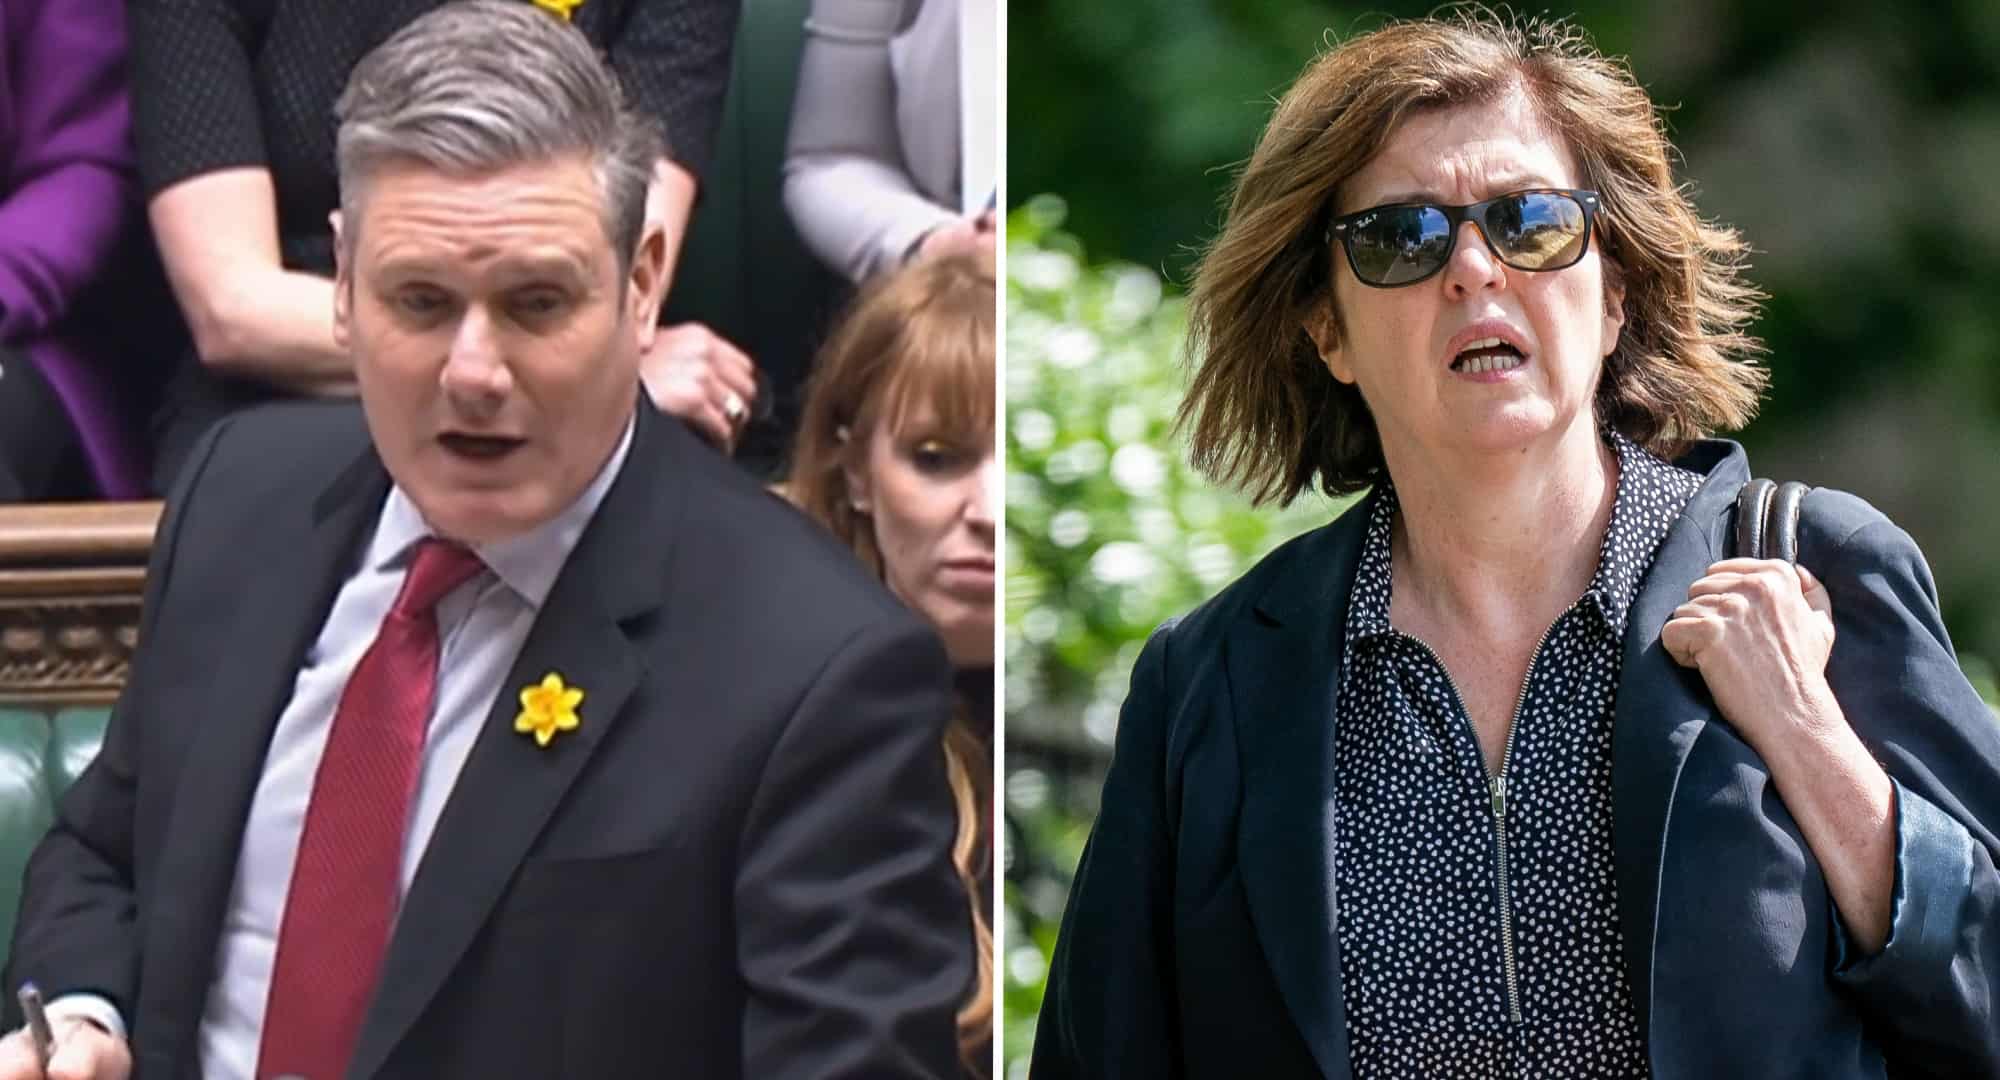 Sir Keir Starmer appoints Sue Gray as chief of staff